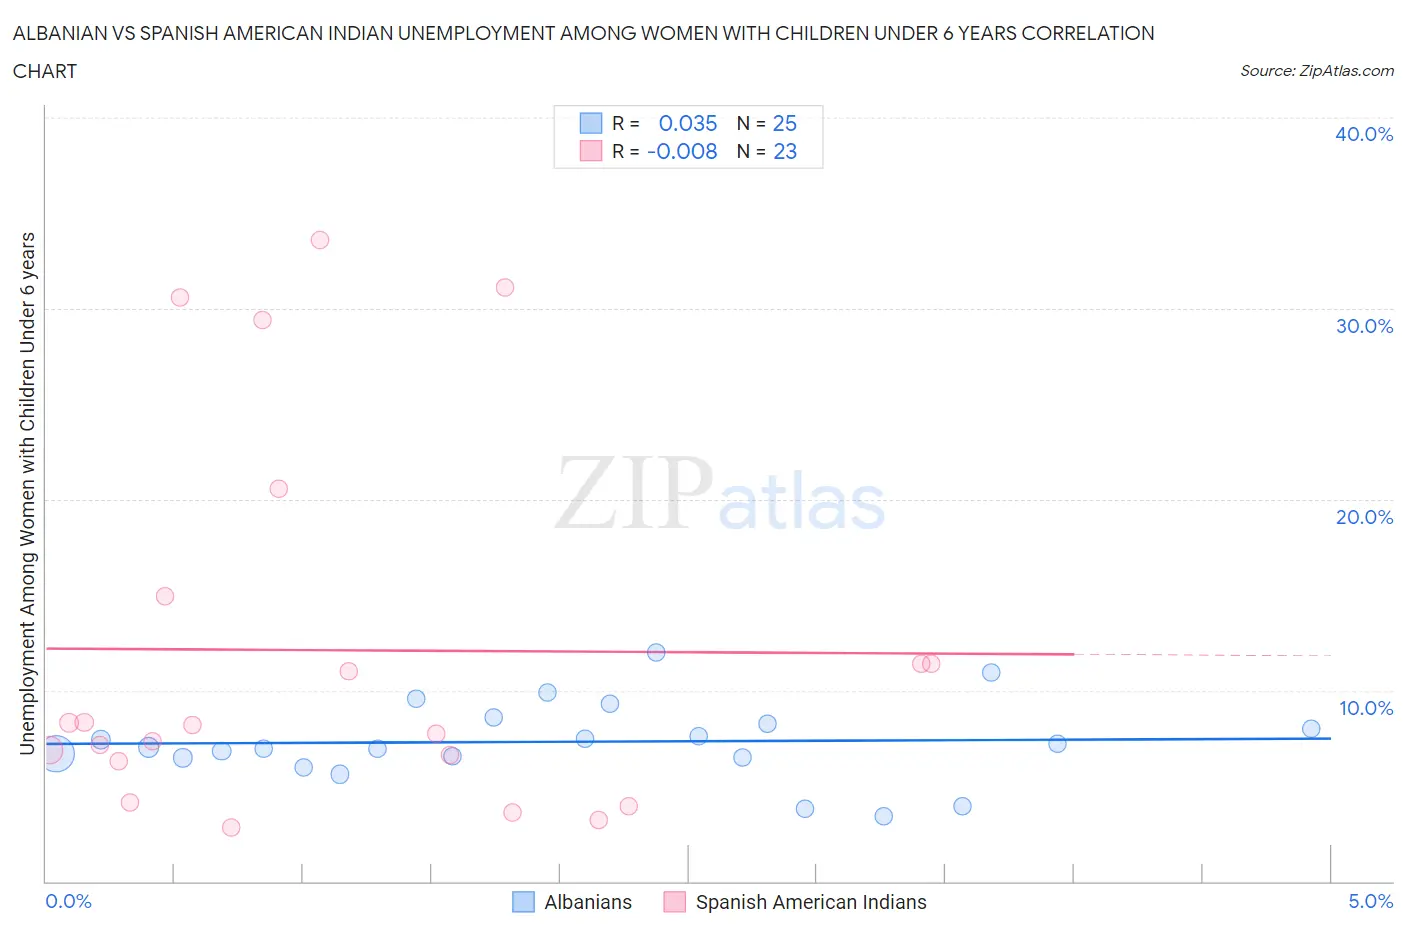 Albanian vs Spanish American Indian Unemployment Among Women with Children Under 6 years